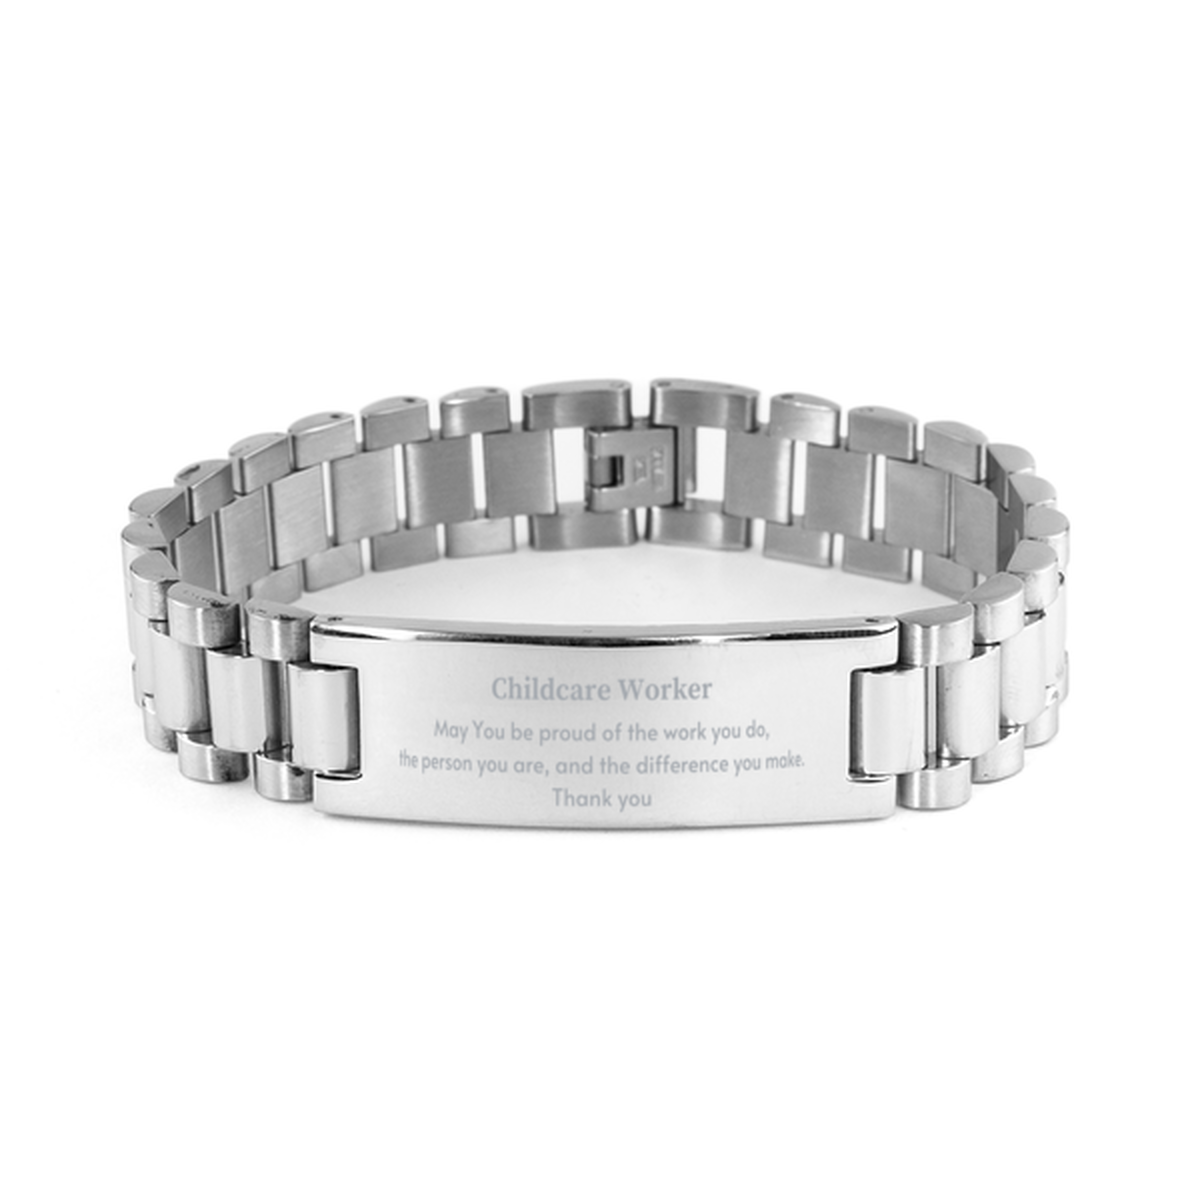 Heartwarming Ladder Stainless Steel Bracelet Retirement Coworkers Gifts for Childcare Worker, Childcare Worker May You be proud of the work you do, the person you are Gifts for Boss Men Women Friends